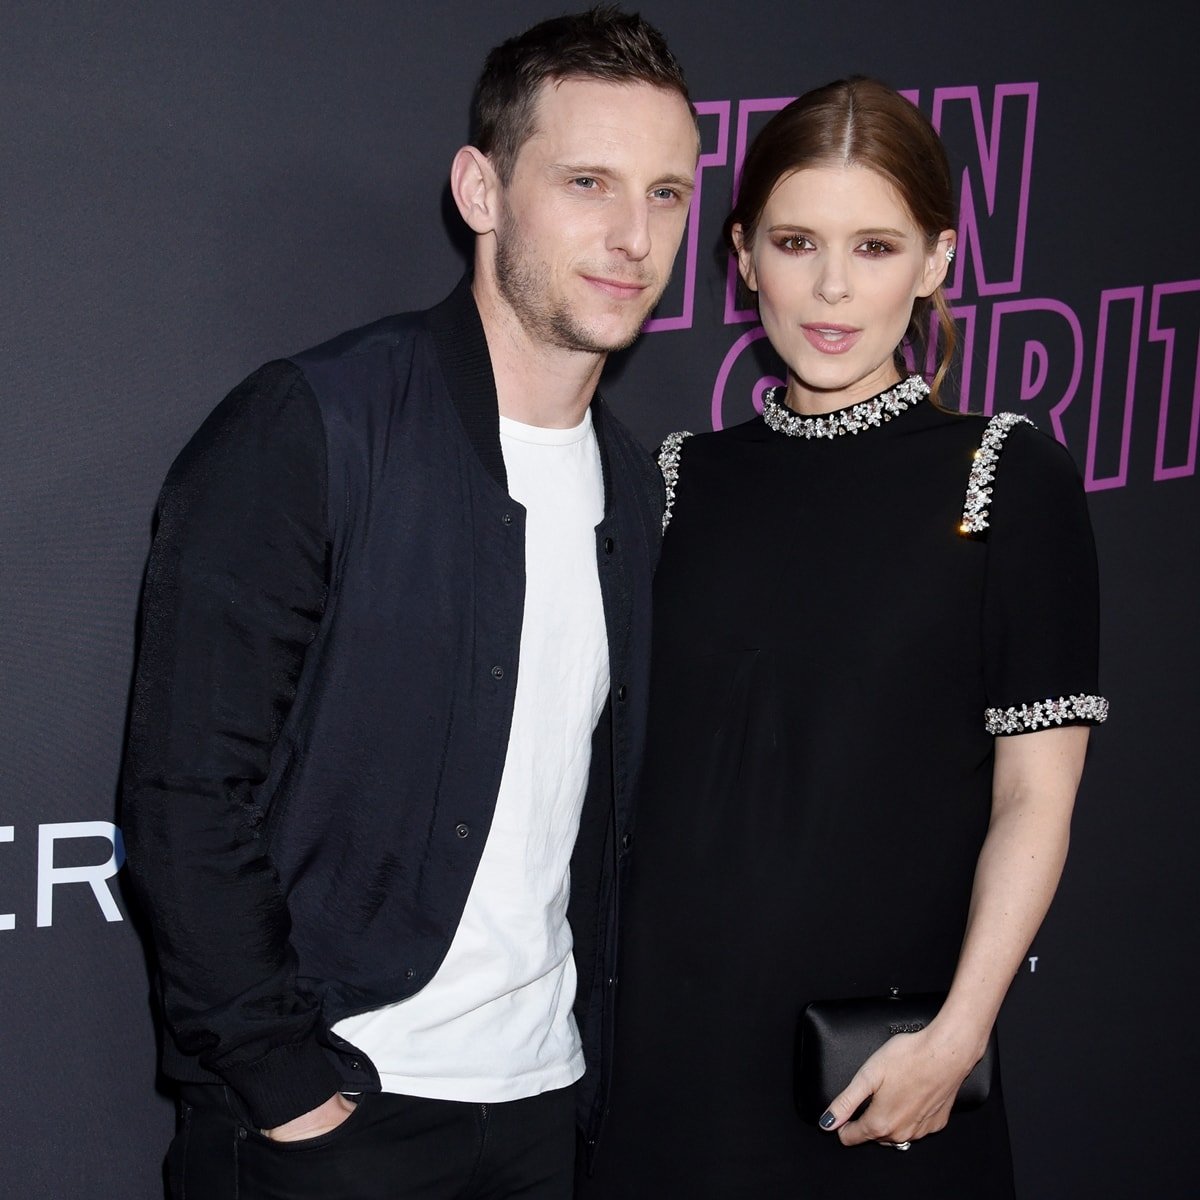 Jamie Bell and Kate Mara met when auditioning for the 2008 American war drama film Stop-Loss